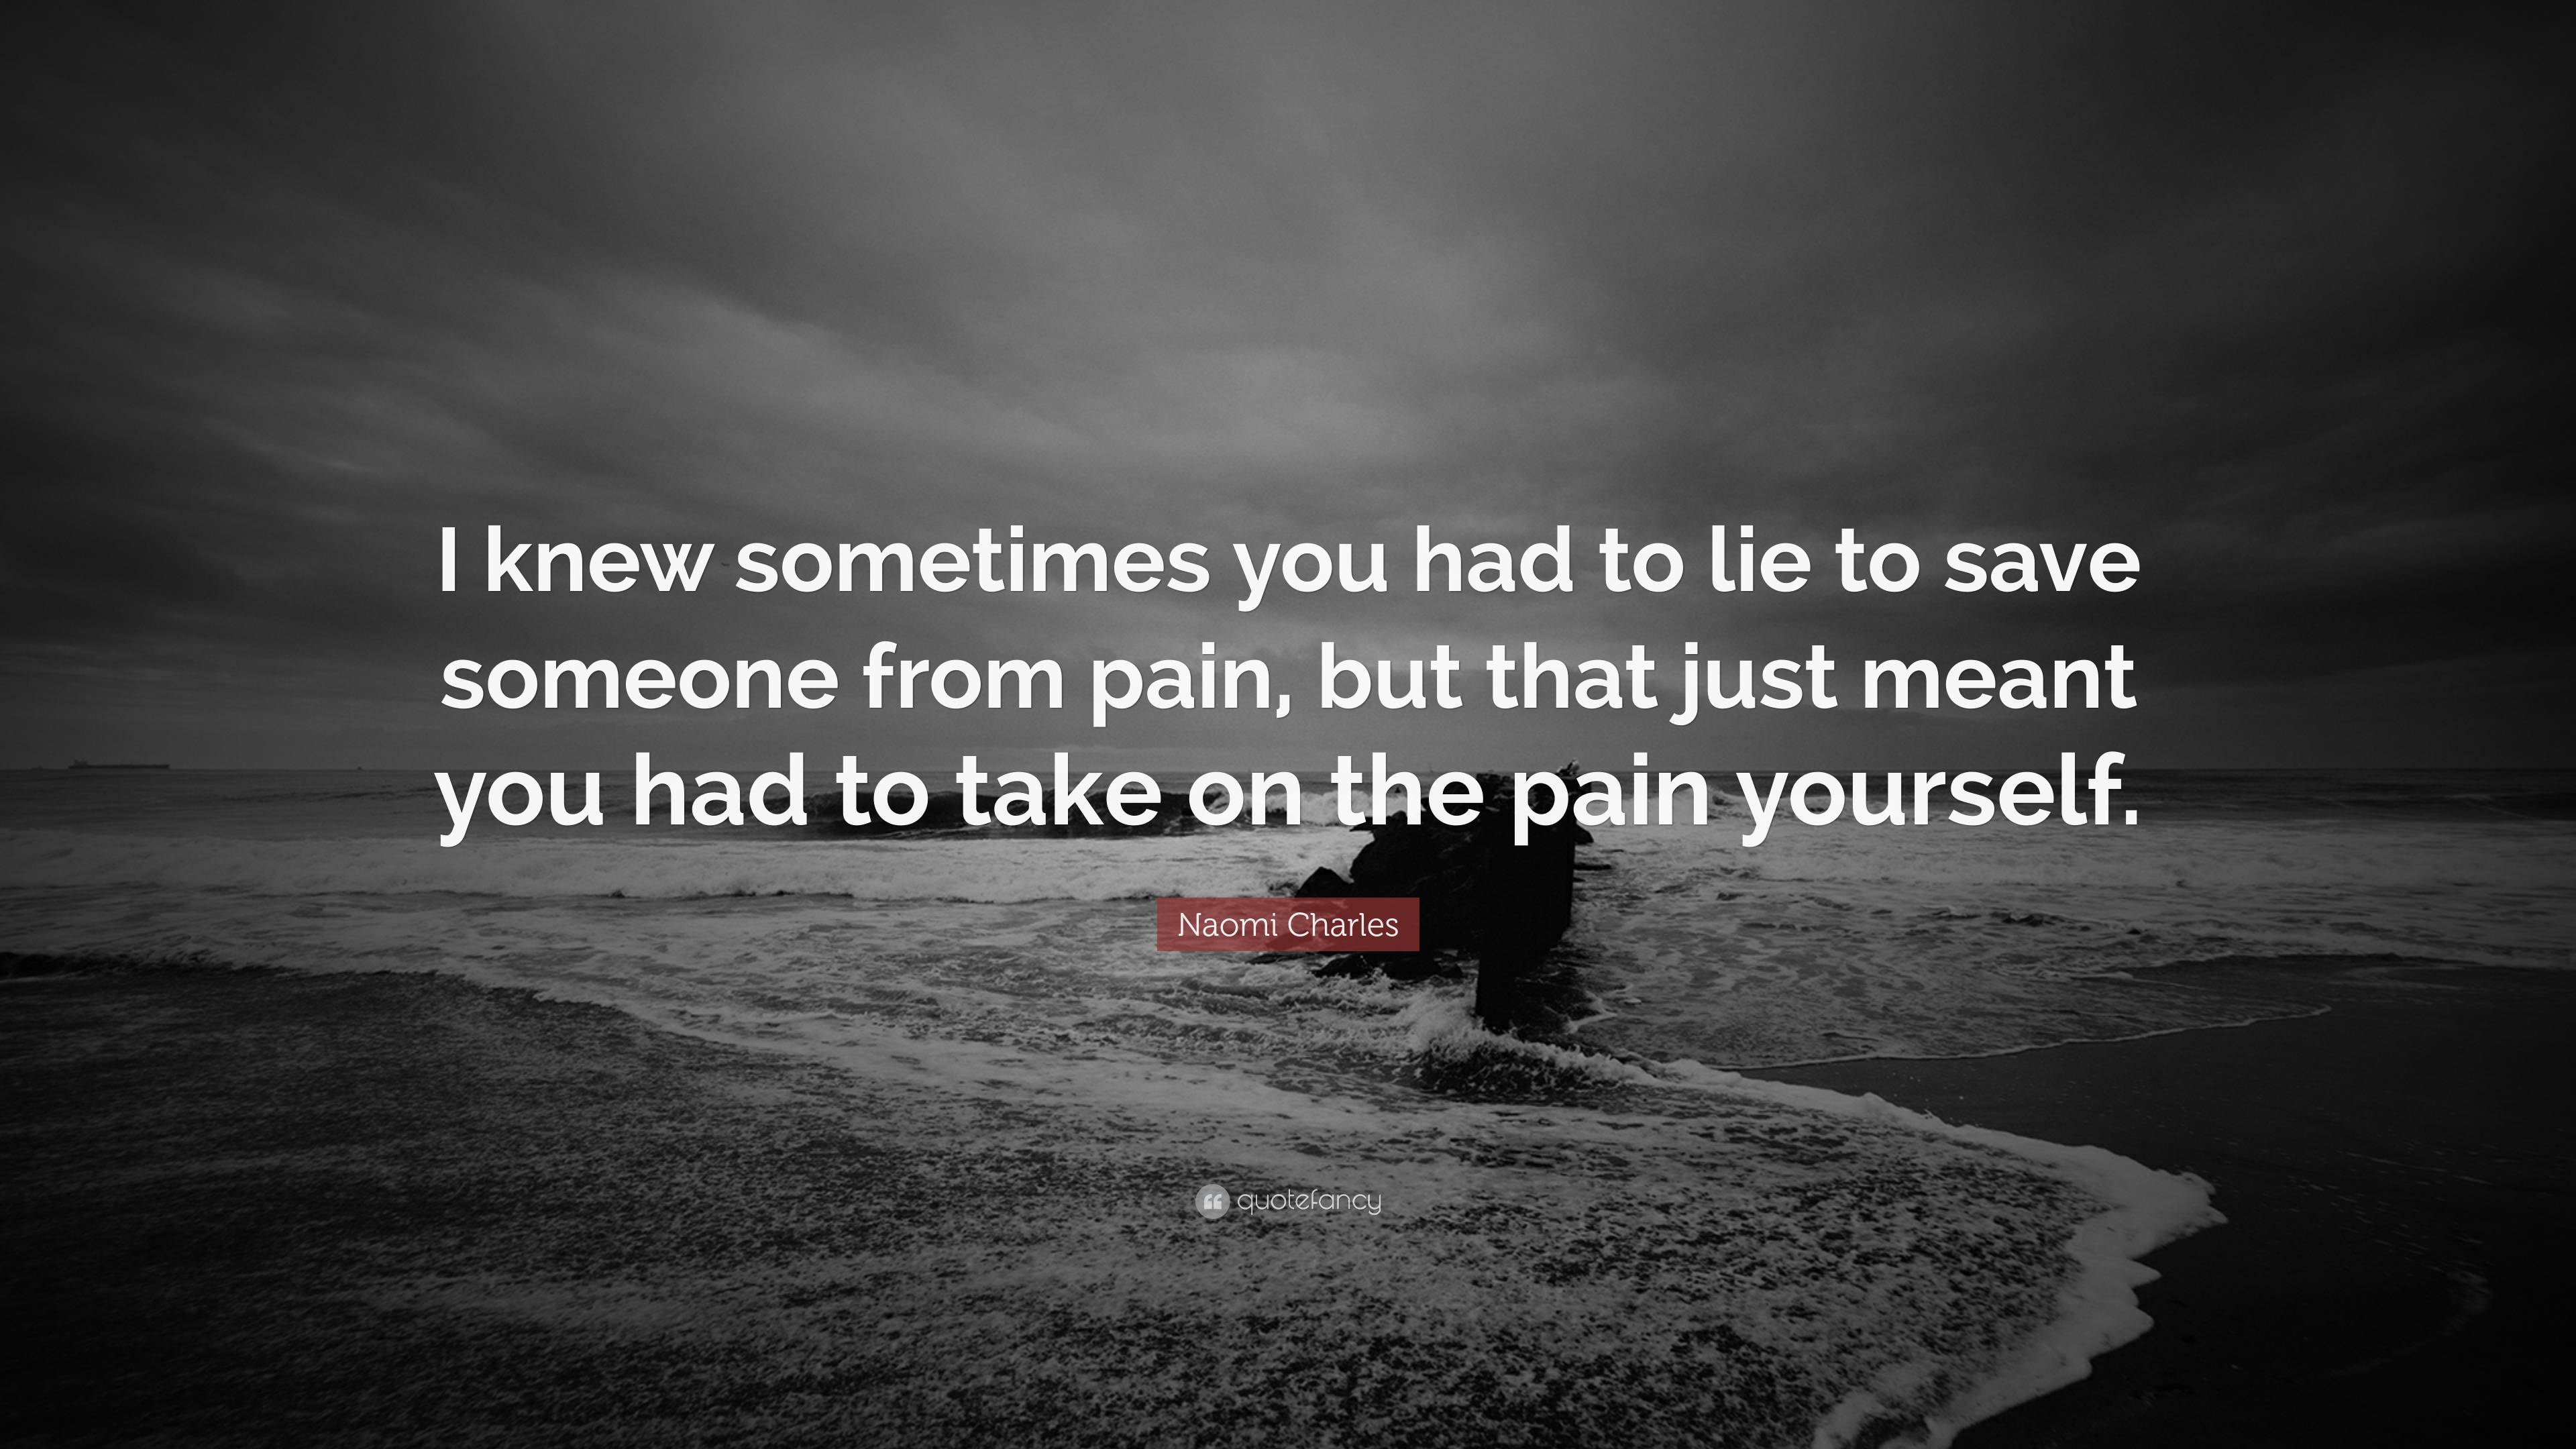 Naomi Charles Quote: “I knew sometimes you had to lie to save someone ...